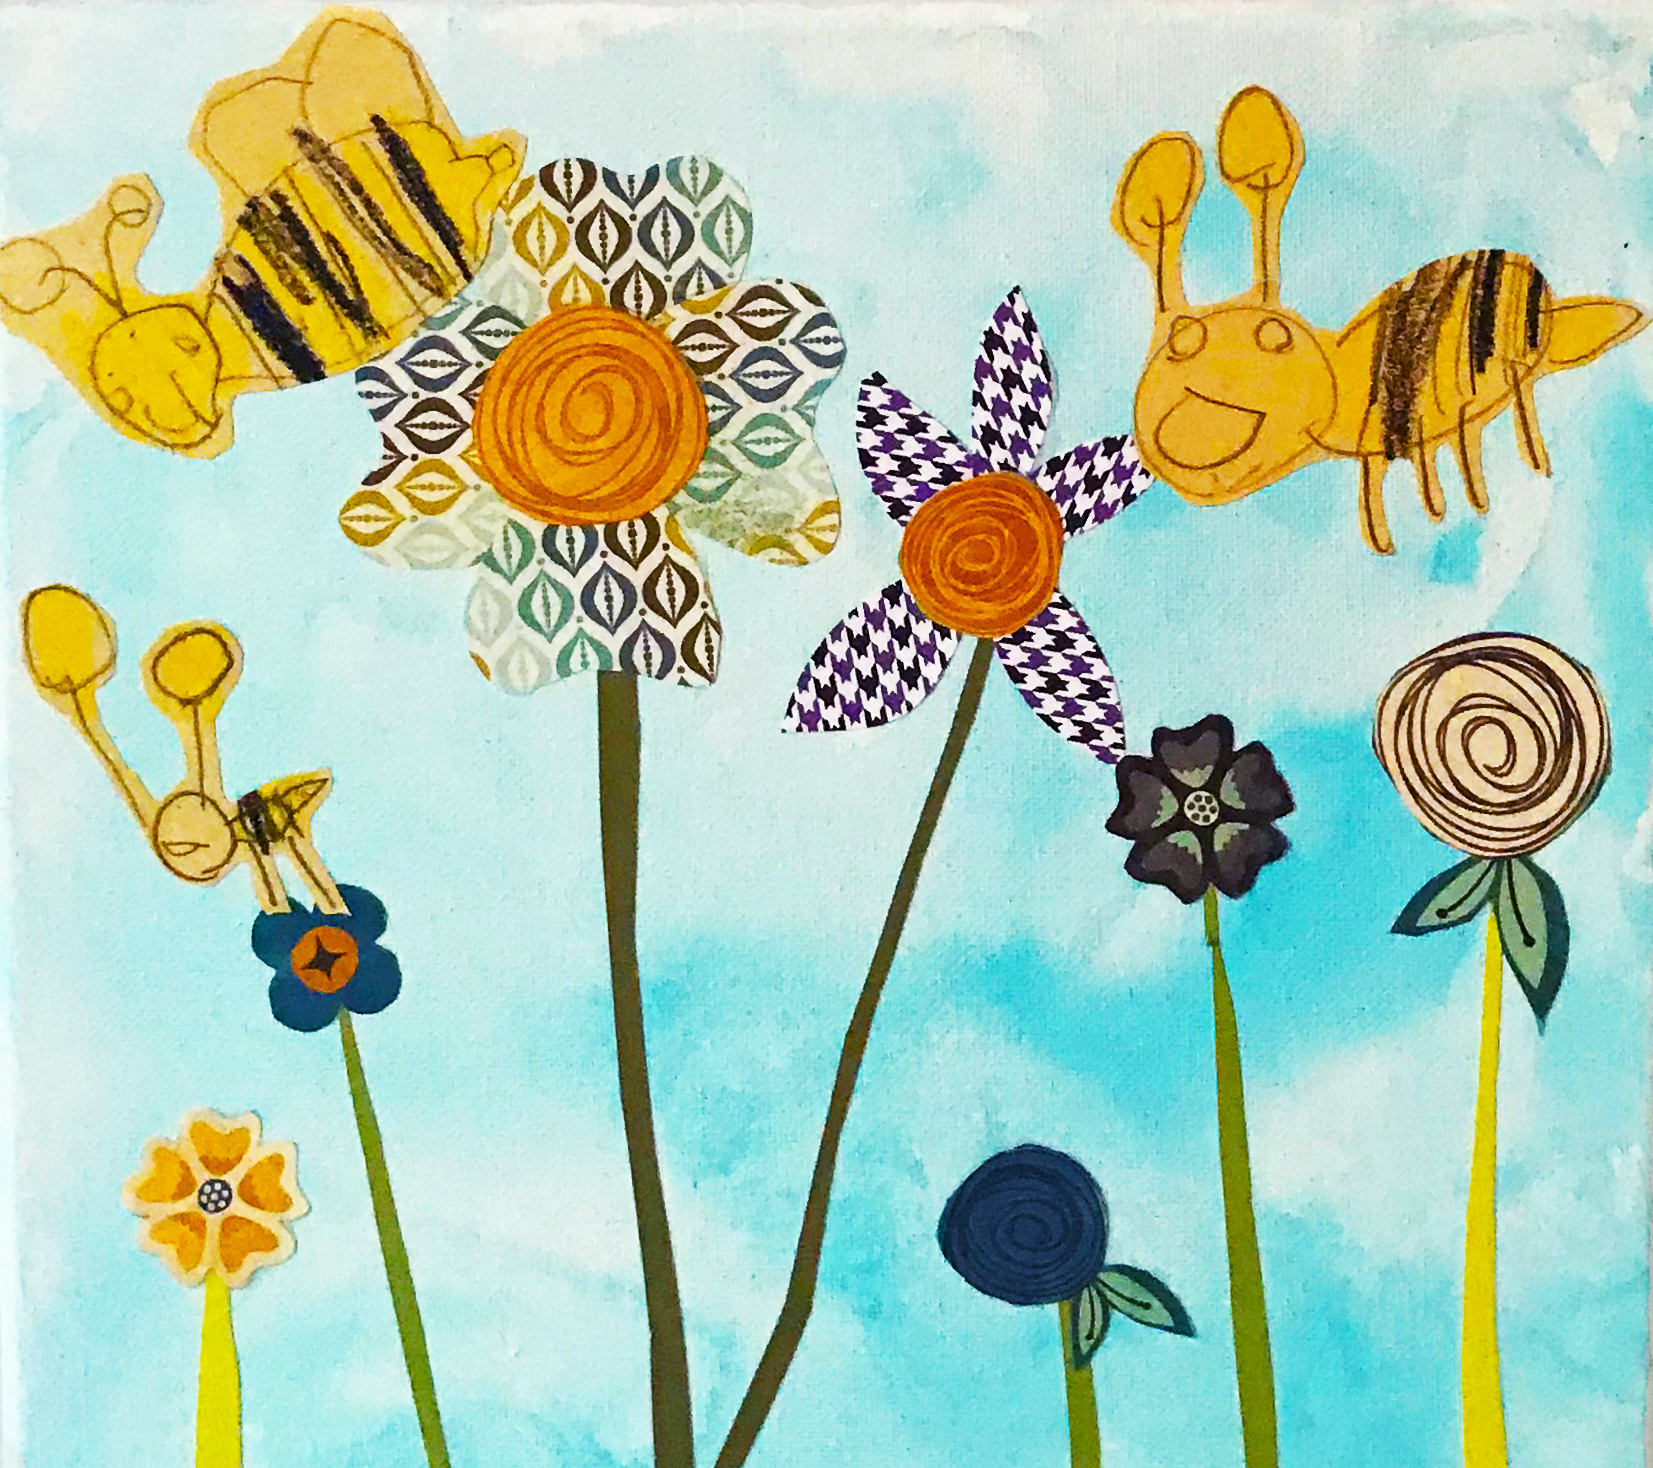 Let your child’s imagination run wild with these scrapbook paper flowers and construction paper bees! #familyfun